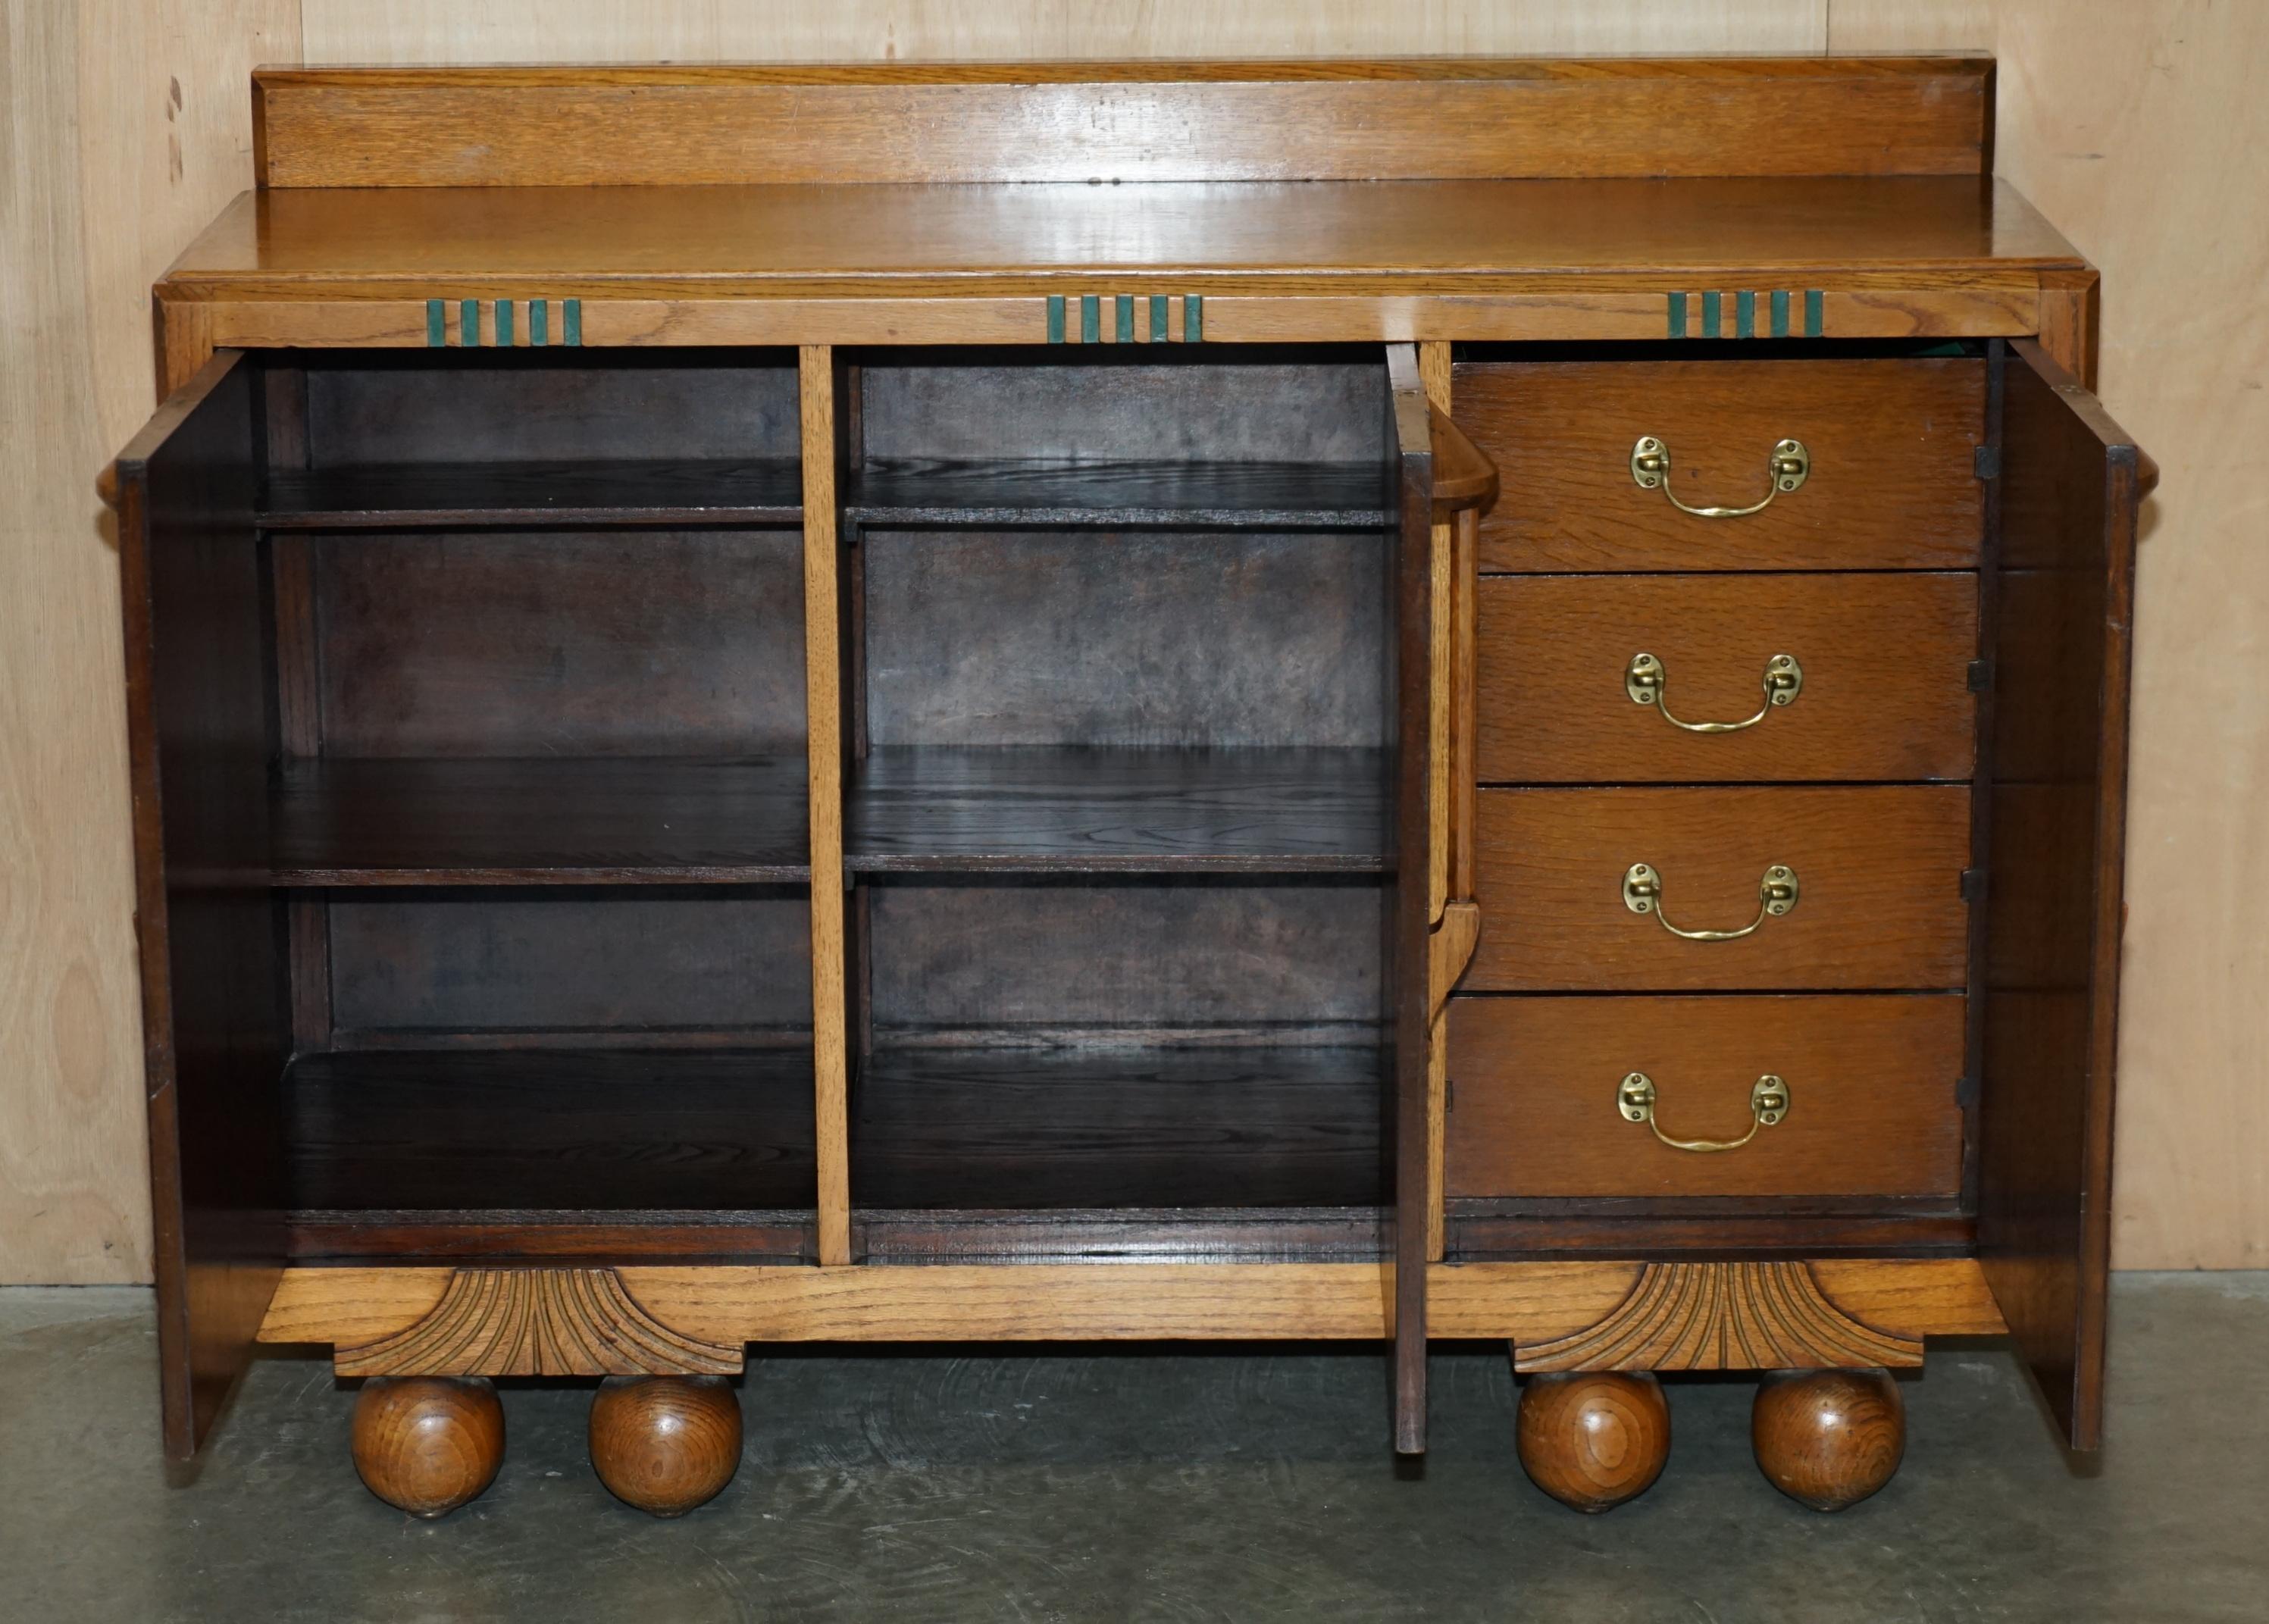 FINE LIBERTY'S COTSWOLD ART DECO OAK CARVED SiDEBOARD CIRCA 1920 PART OF A SUITE im Angebot 10